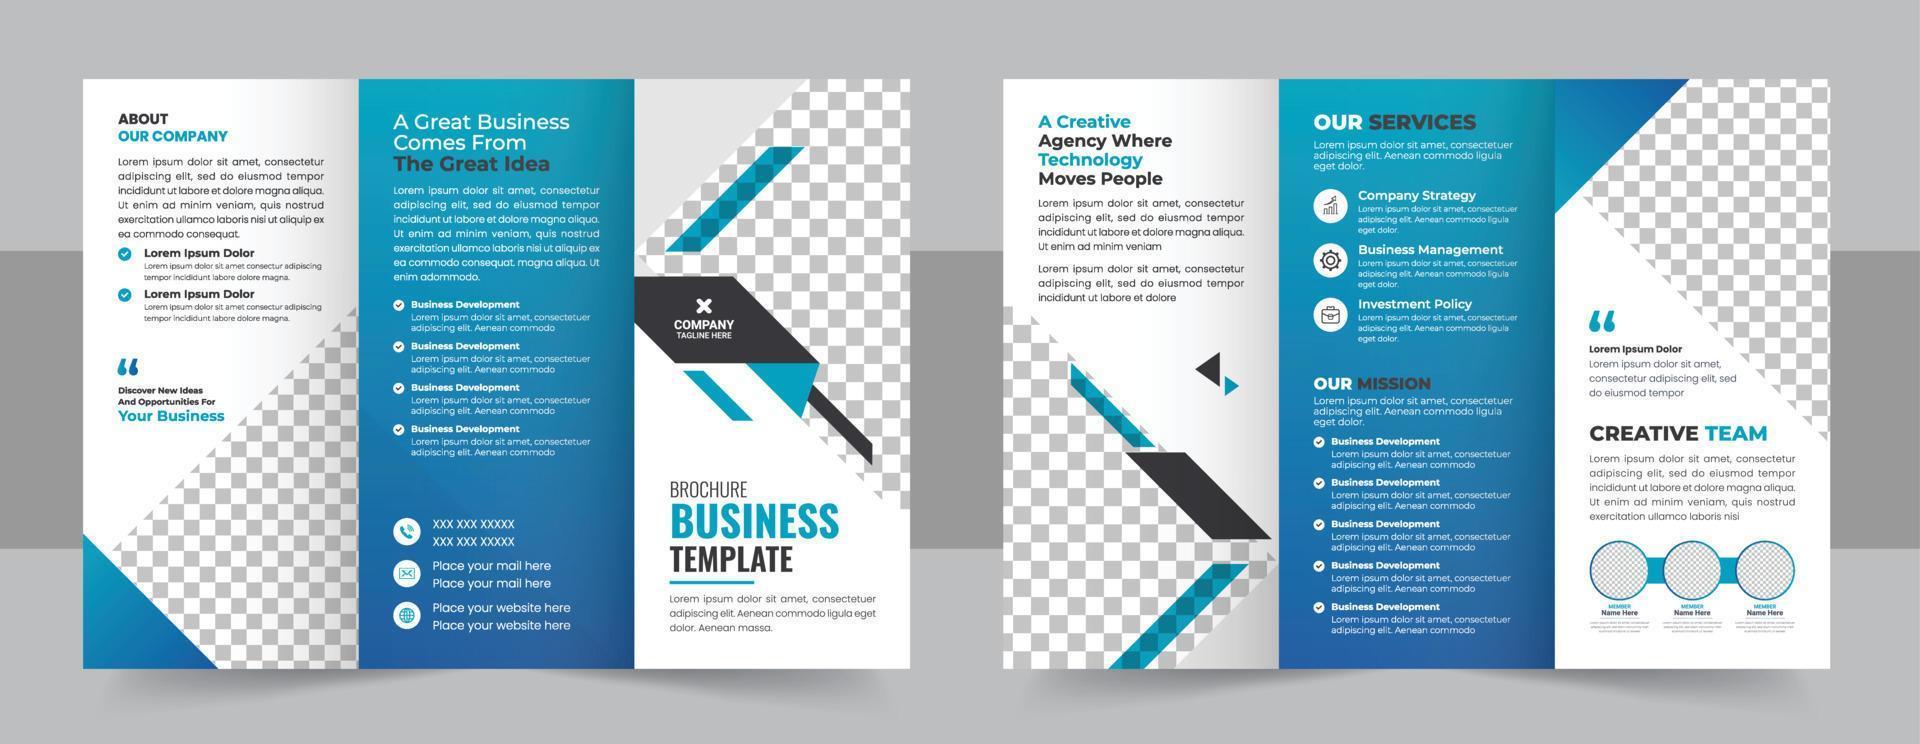 Trifold Brochure Design Template for Your Company, Corporate, Business, Advertising, Marketing Agency and Internet Business vector